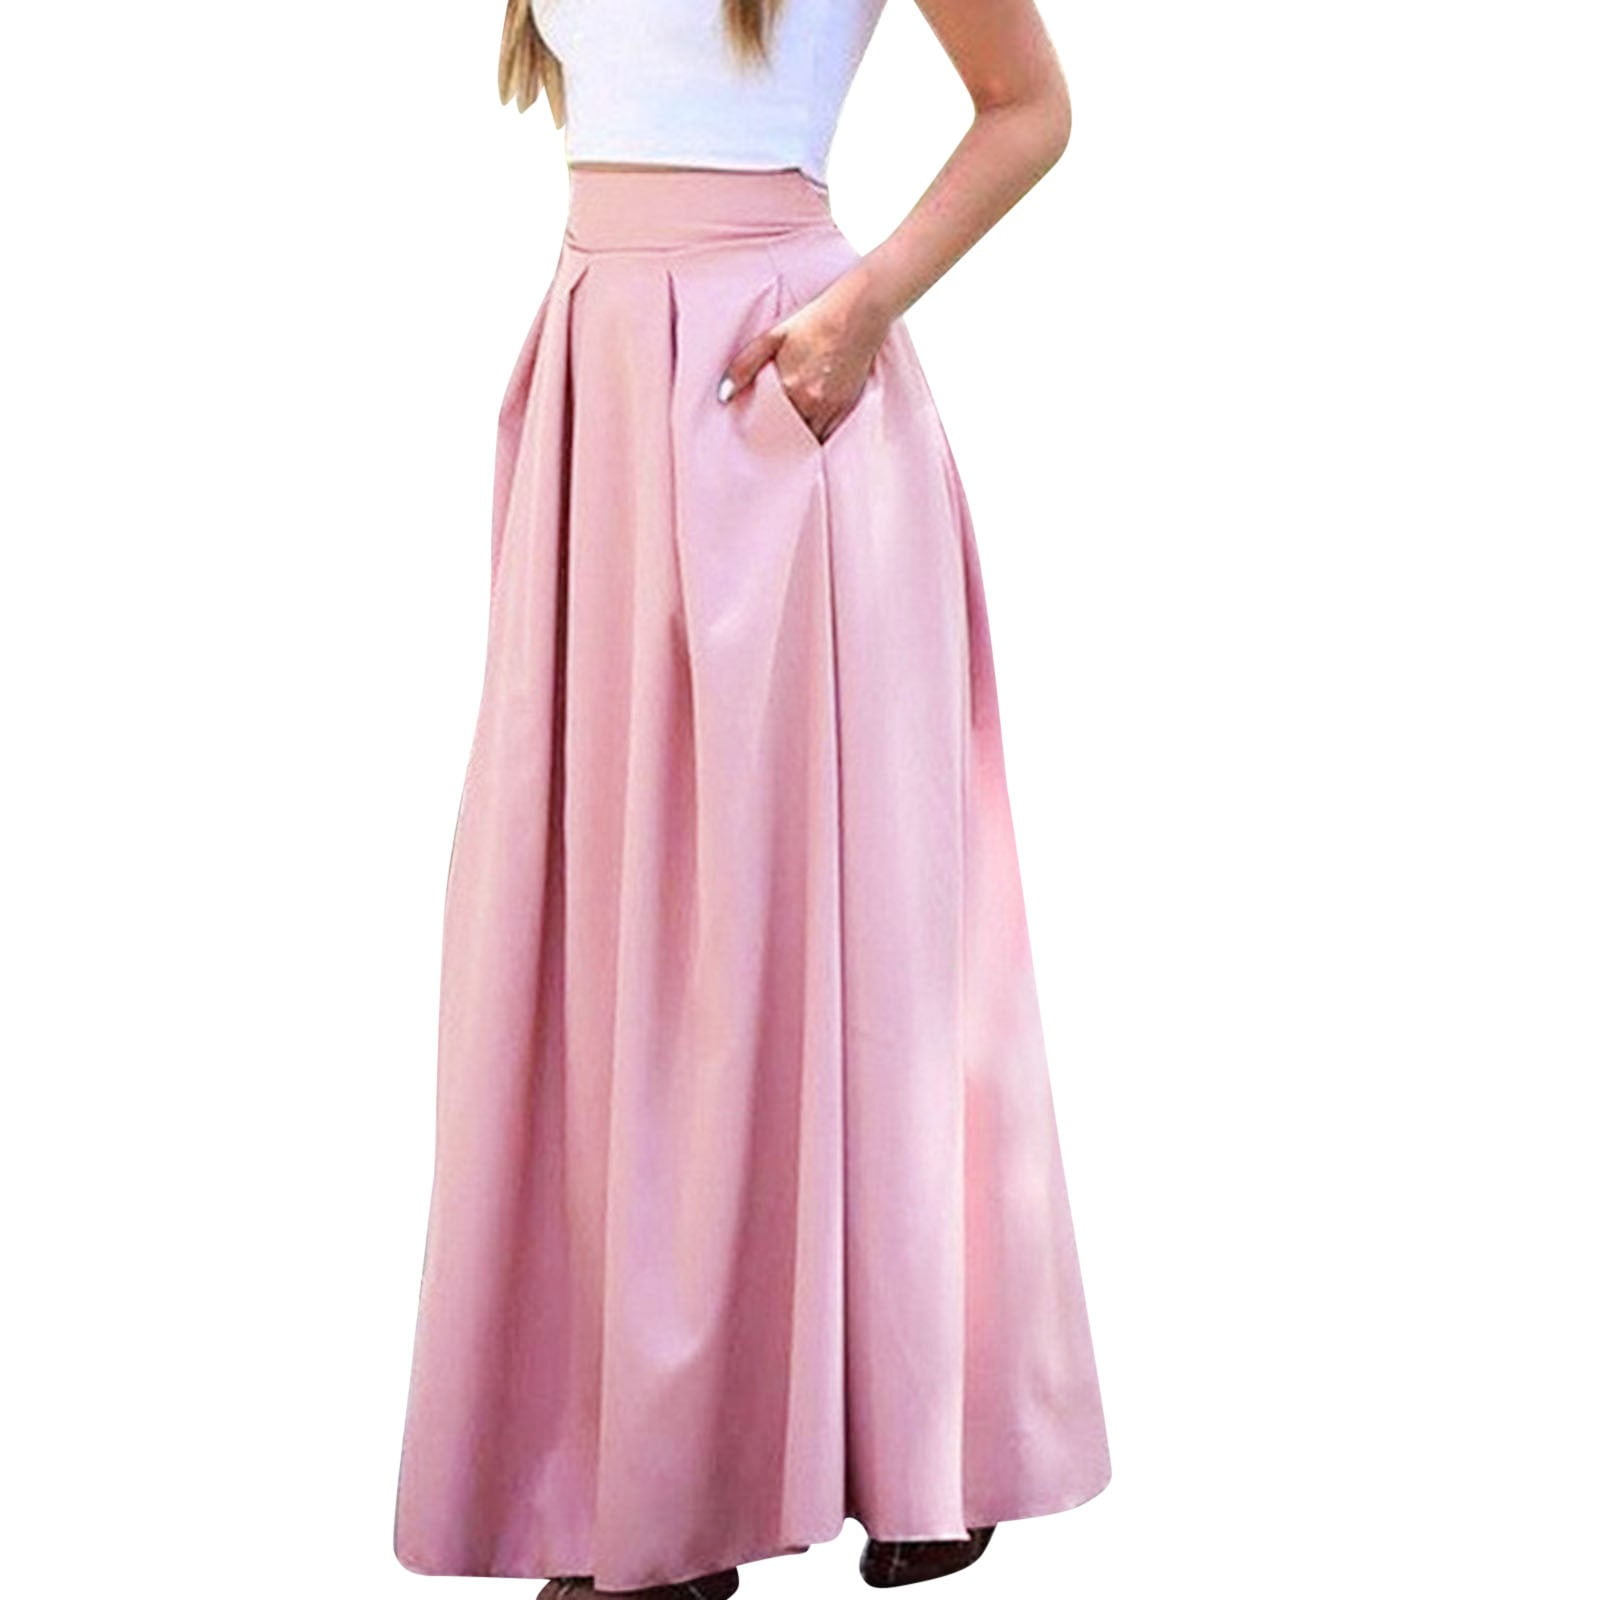 Latest 30 Long Skirts for Women Designs and Patterns Trending Now (2022) -  Tips and Beauty | Boho outfits, Long skirts for women, Skirt design